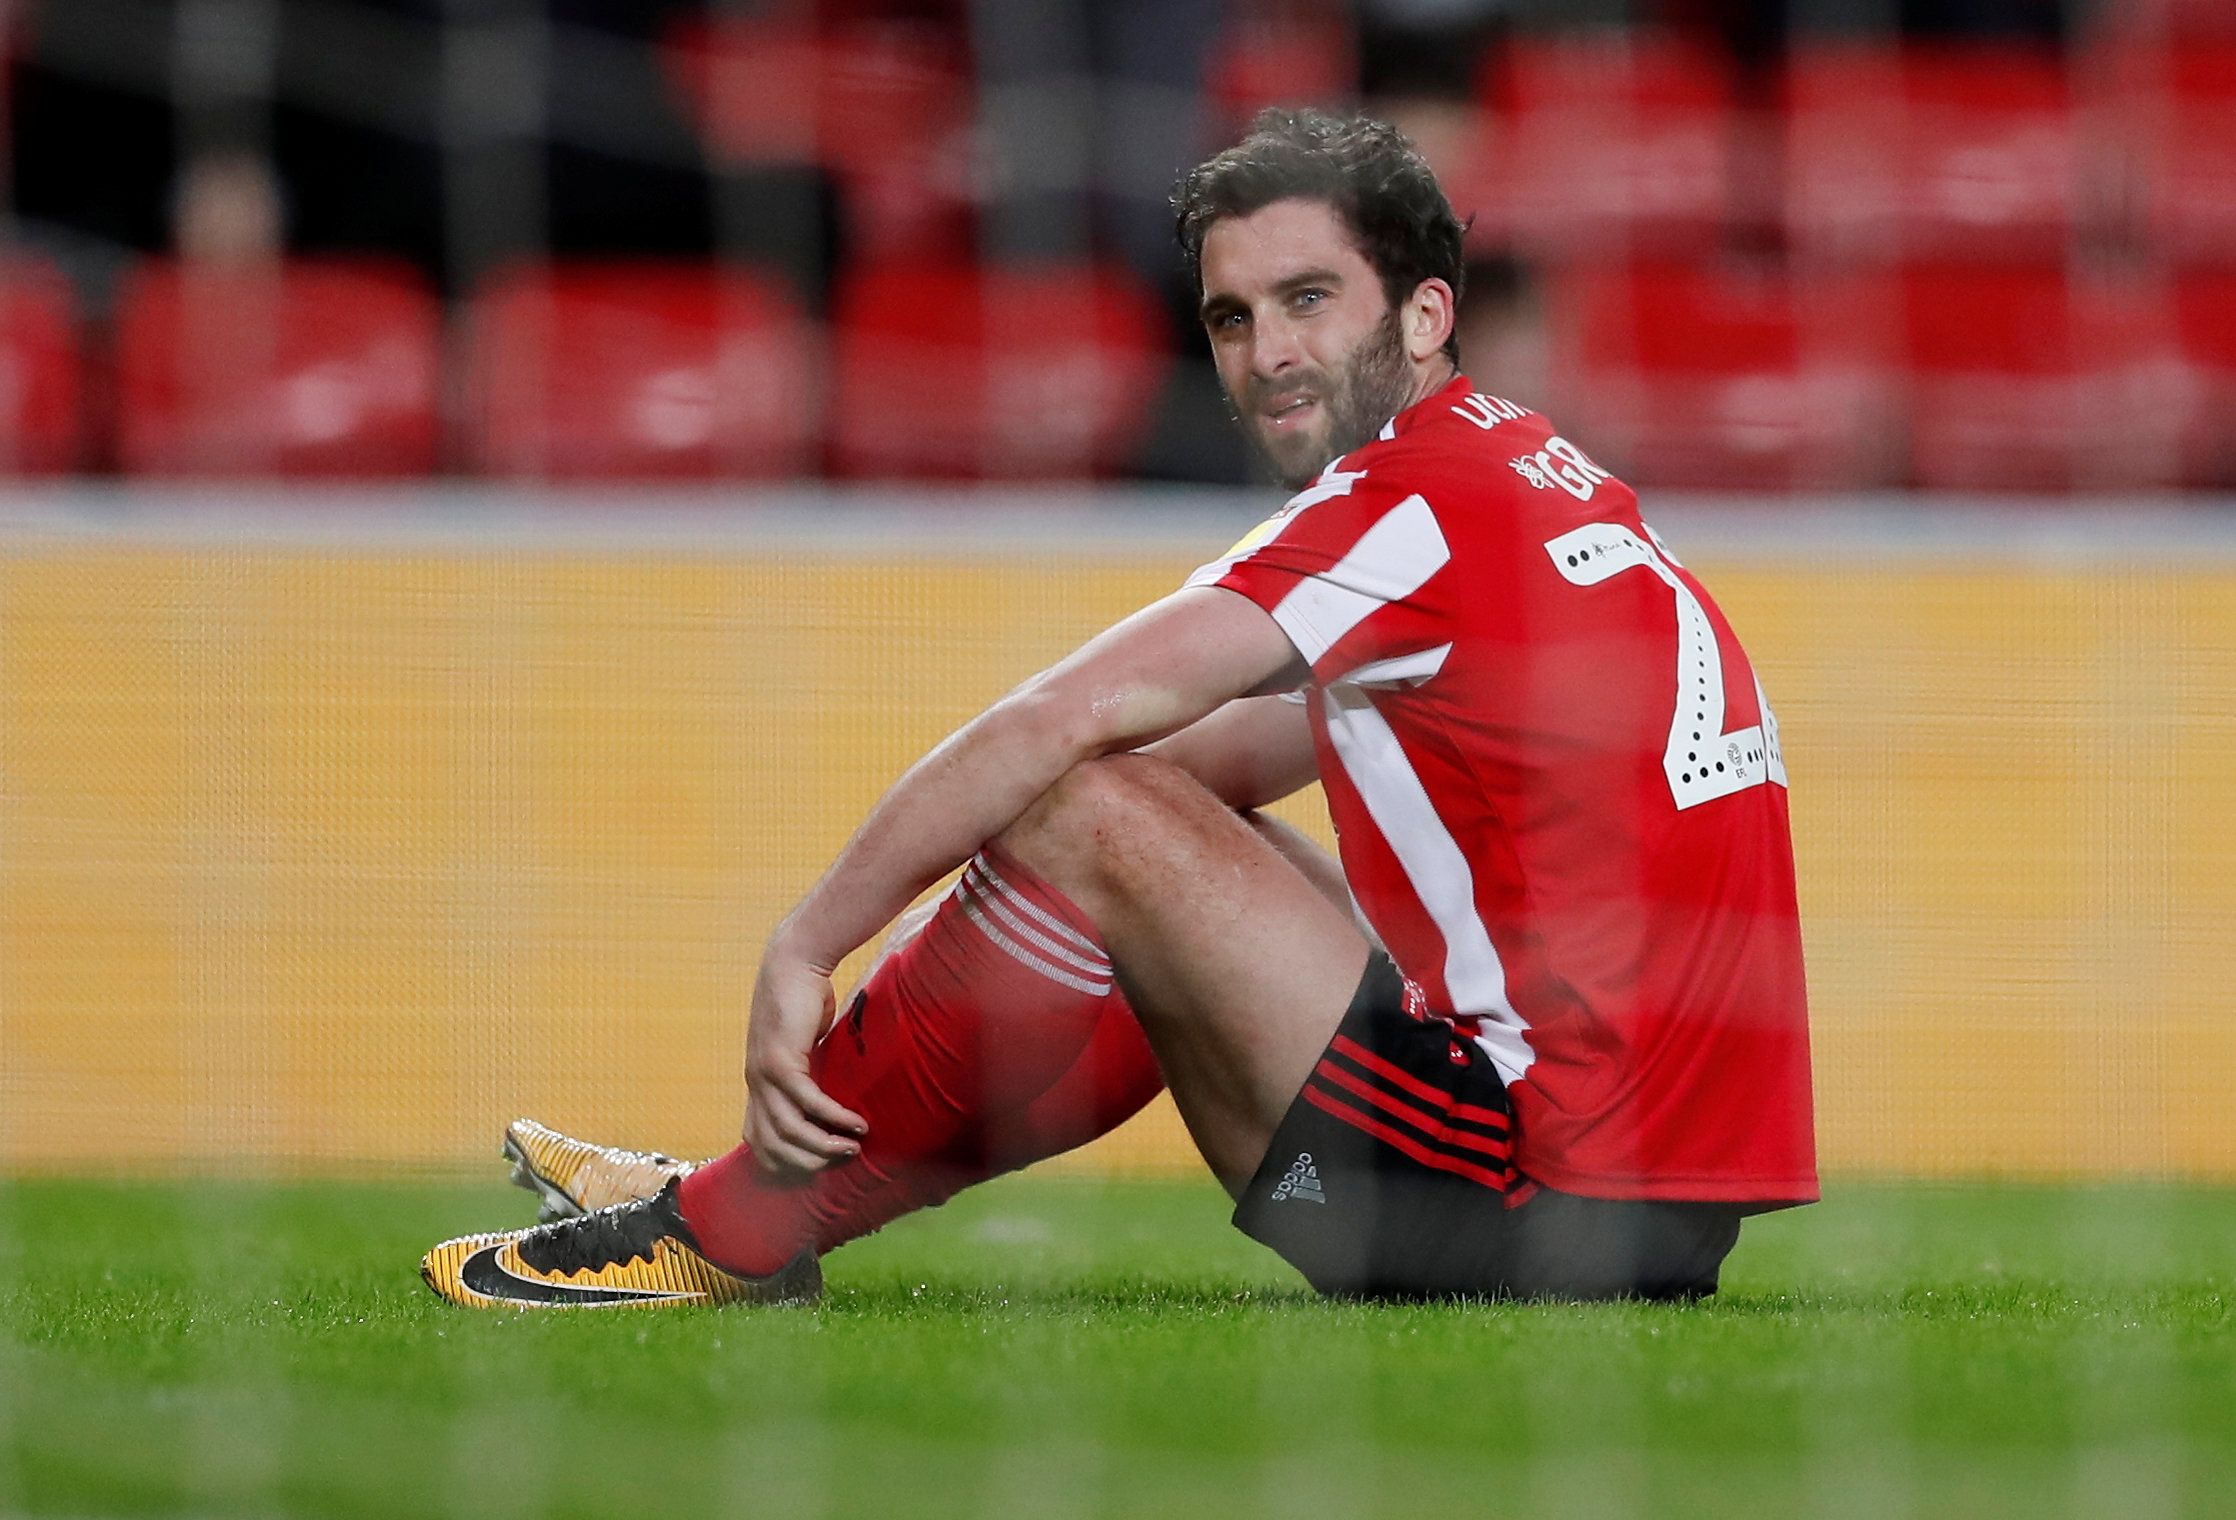 Soccer Football - League One - Sunderland v Blackpool - Stadium of Light, Sunderland, Britain - February 12, 2019   Sunderland's Will Grigg reacts   Action Images/Lee Smith    EDITORIAL USE ONLY. No use with unauthorized audio, video, data, fixture lists, club/league logos or 